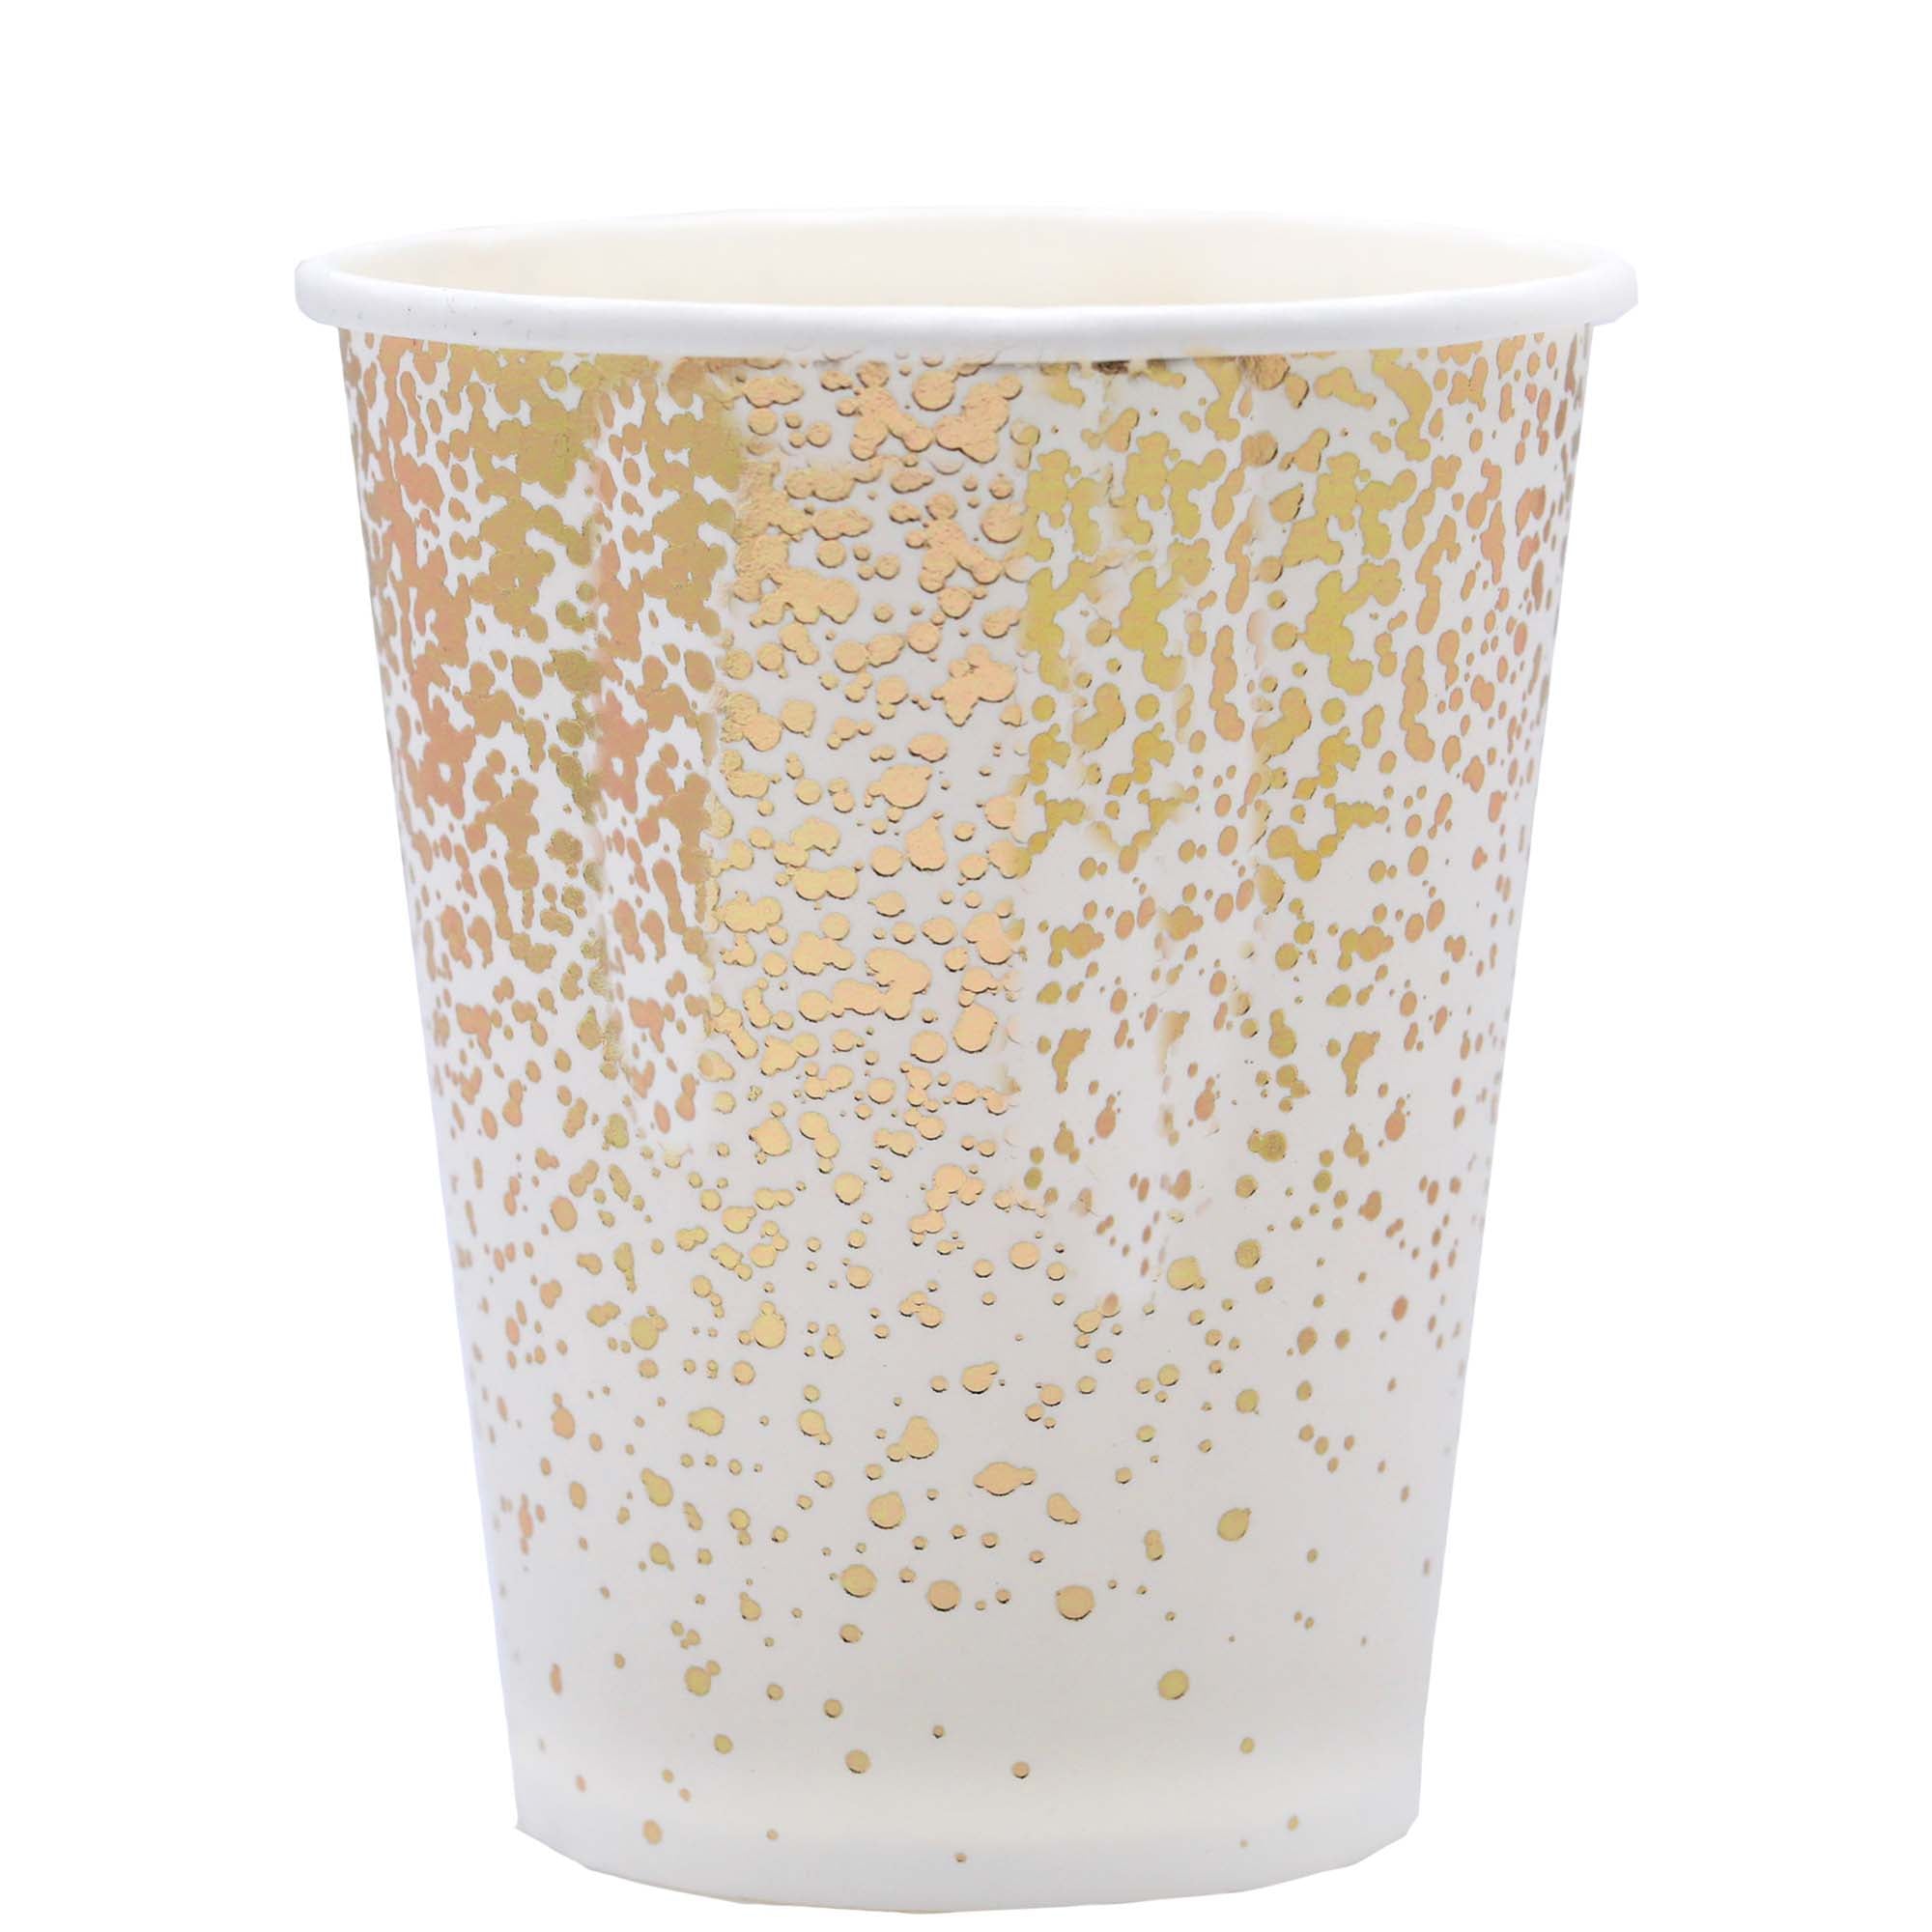 No?l Scintillant Paper Cups, White and Gold, 9 Oz, 10 Count